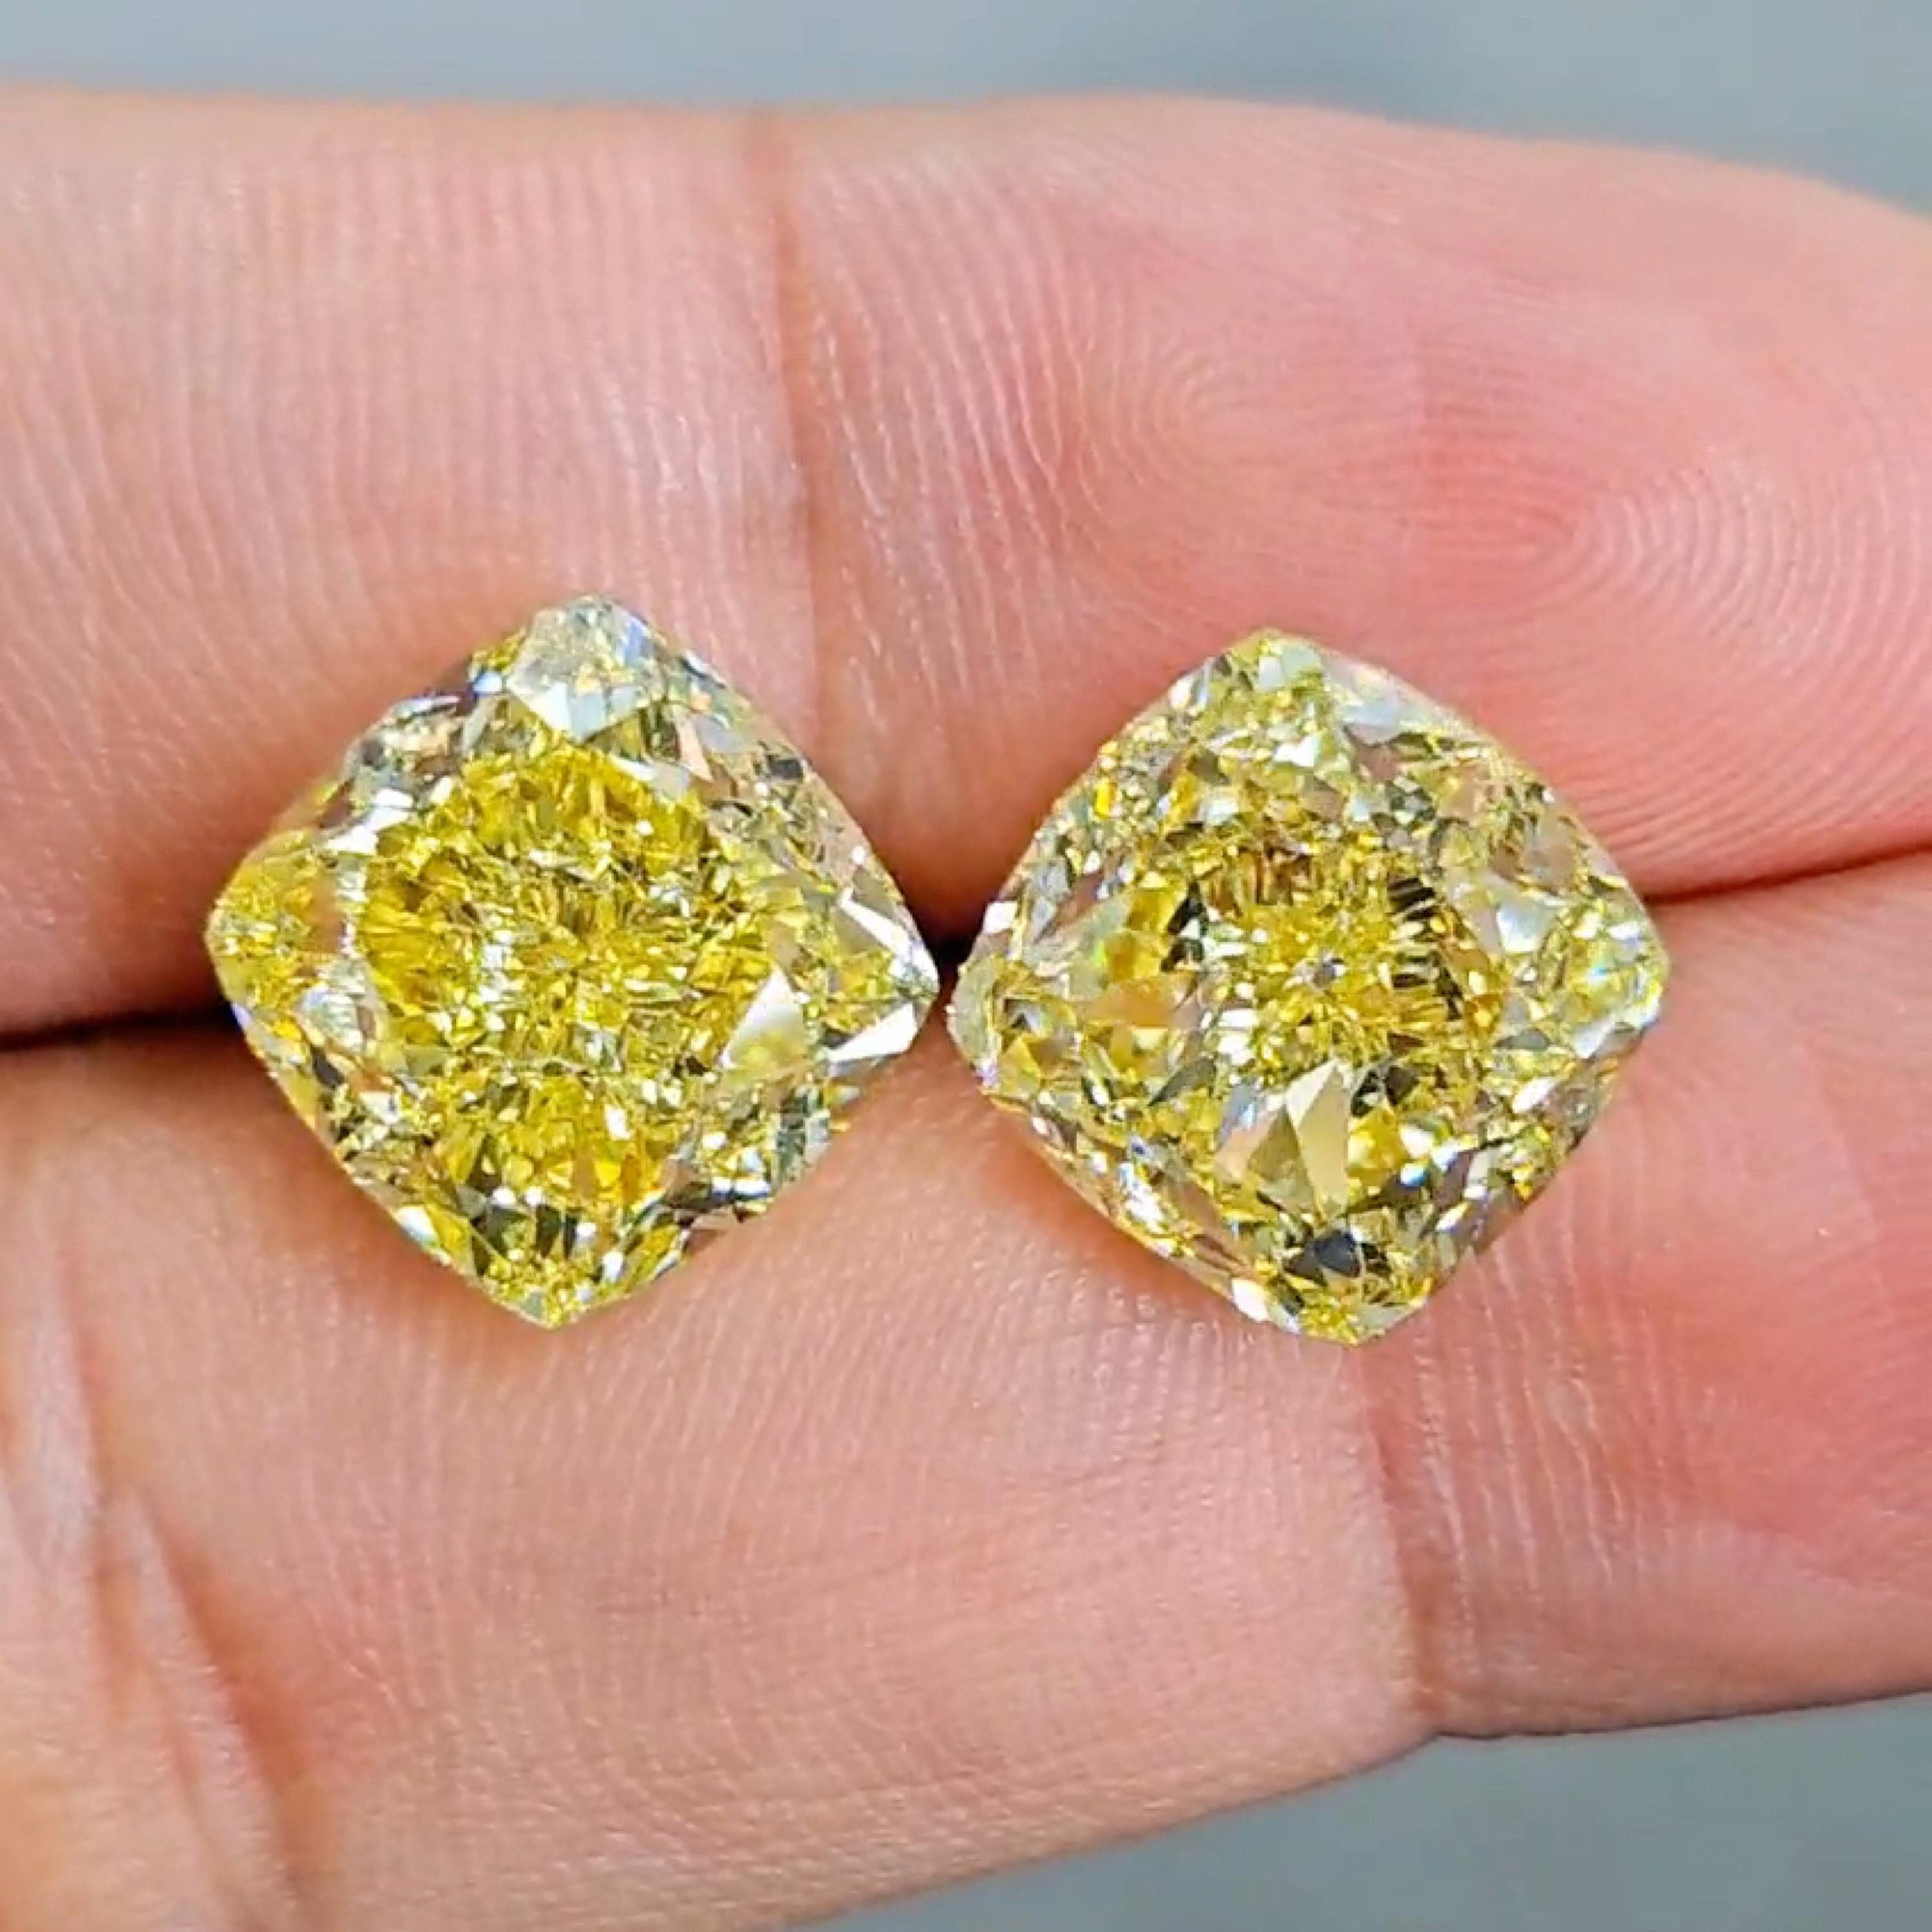 From Emilio Jewelry, a well known and respected wholesaler/dealer located on New York’s iconic Fifth Avenue, 
Mind blowing perfect matching pair of Gia Certified Natural Fancy Intense Yellow Diamonds weighing over 10.00 carats each and 20 carats